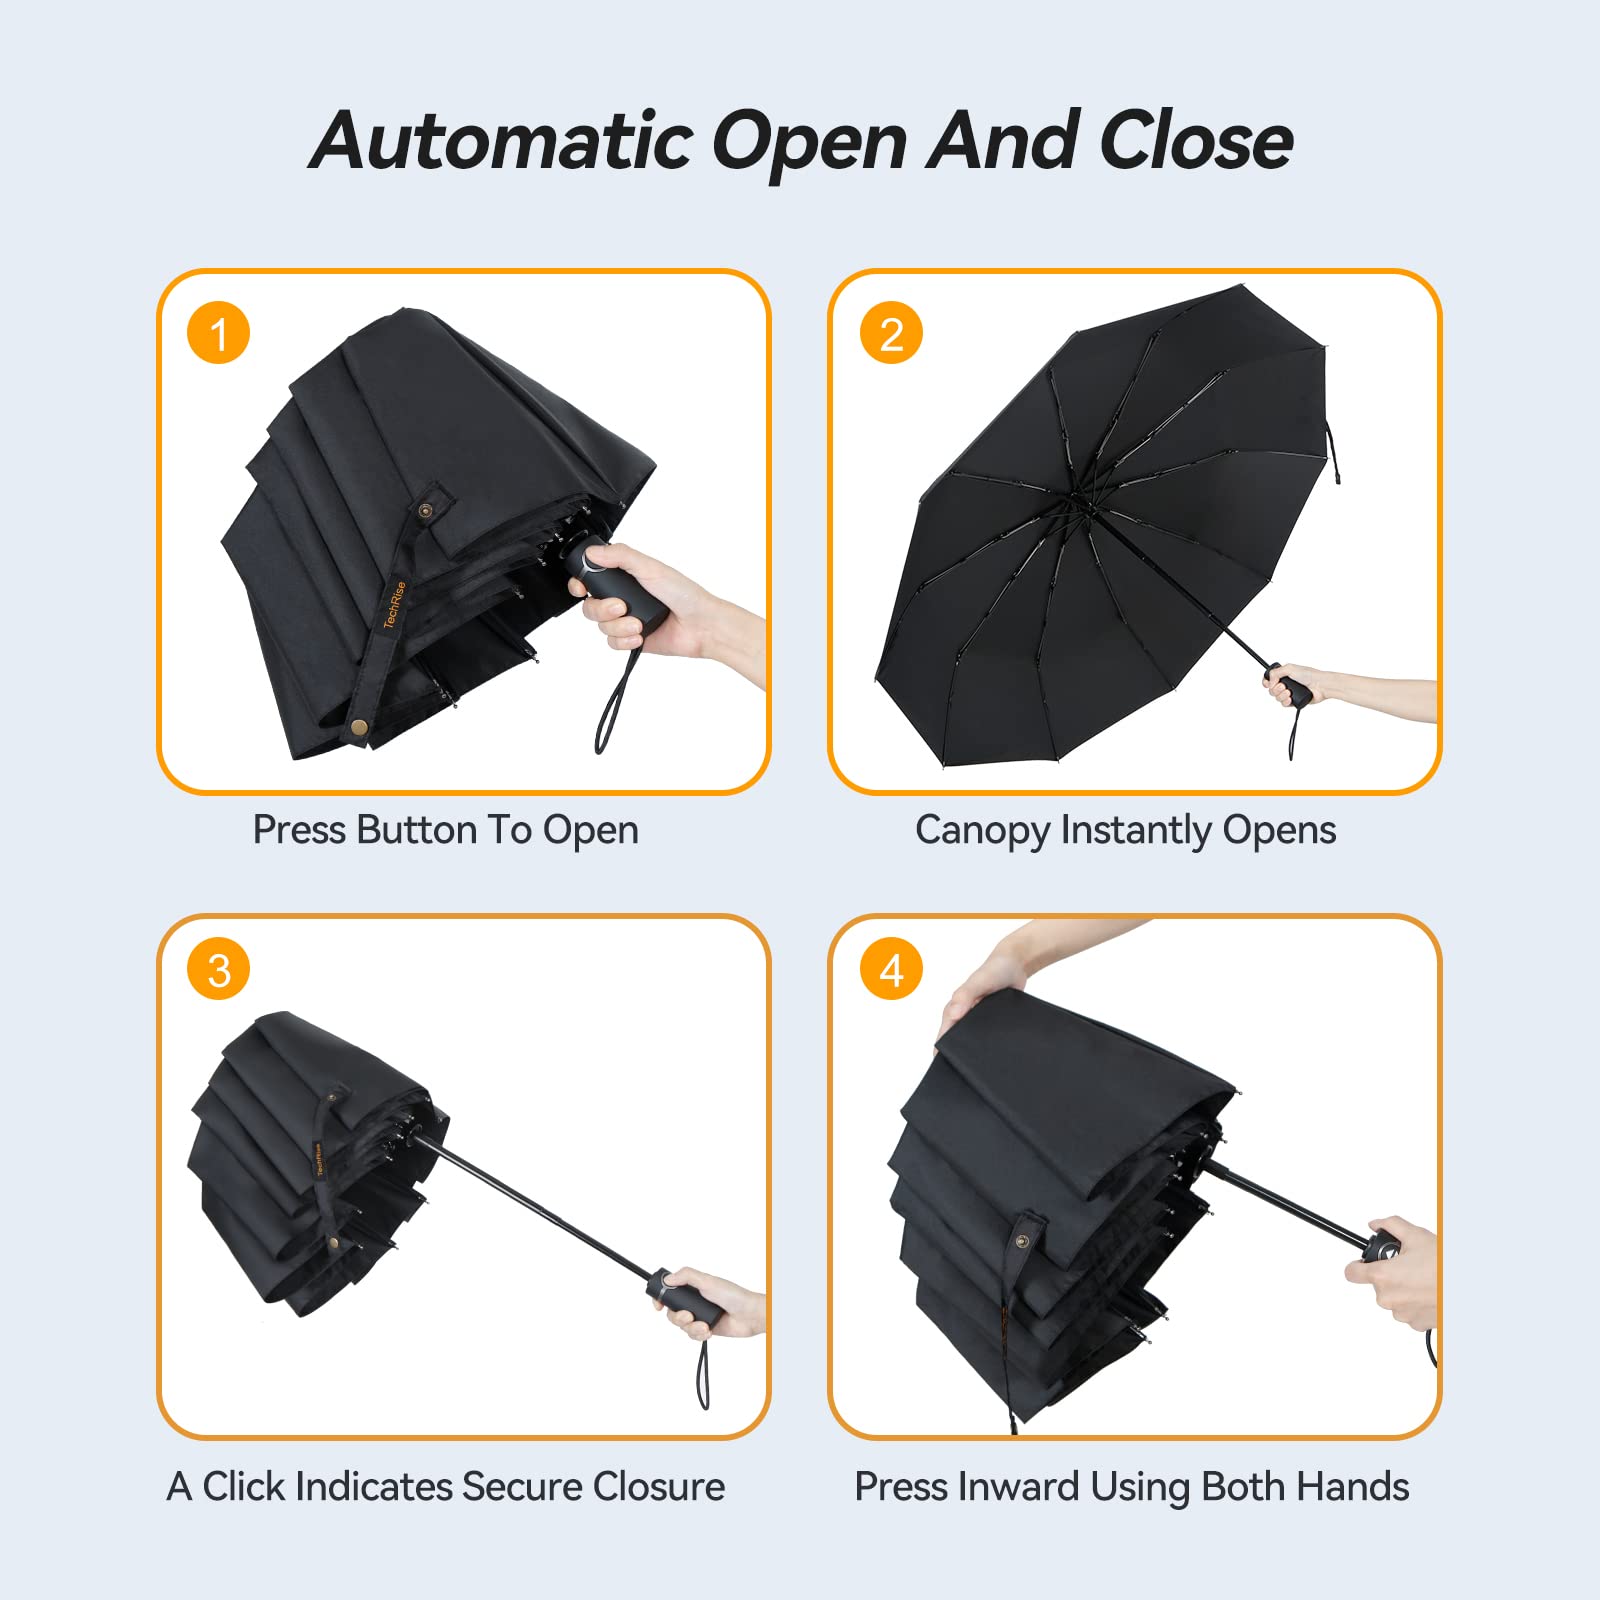 TechRise Windproof Umbrella with 10 Ribs